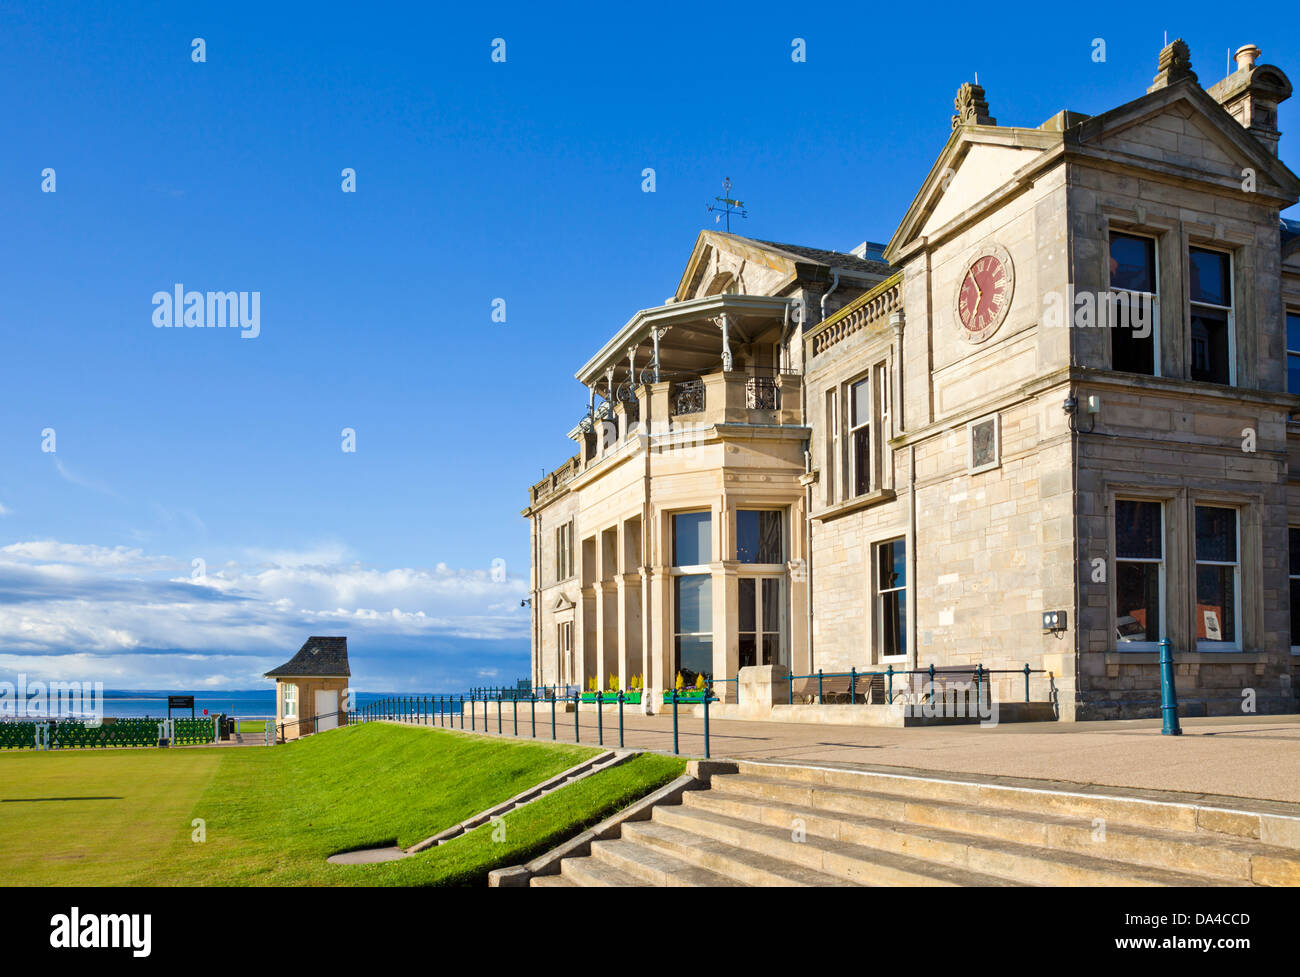 The Royal and Ancient Golf Club of St Andrews golf course and club house St Andrews Fife Scotland UK GB EU Europe Stock Photo